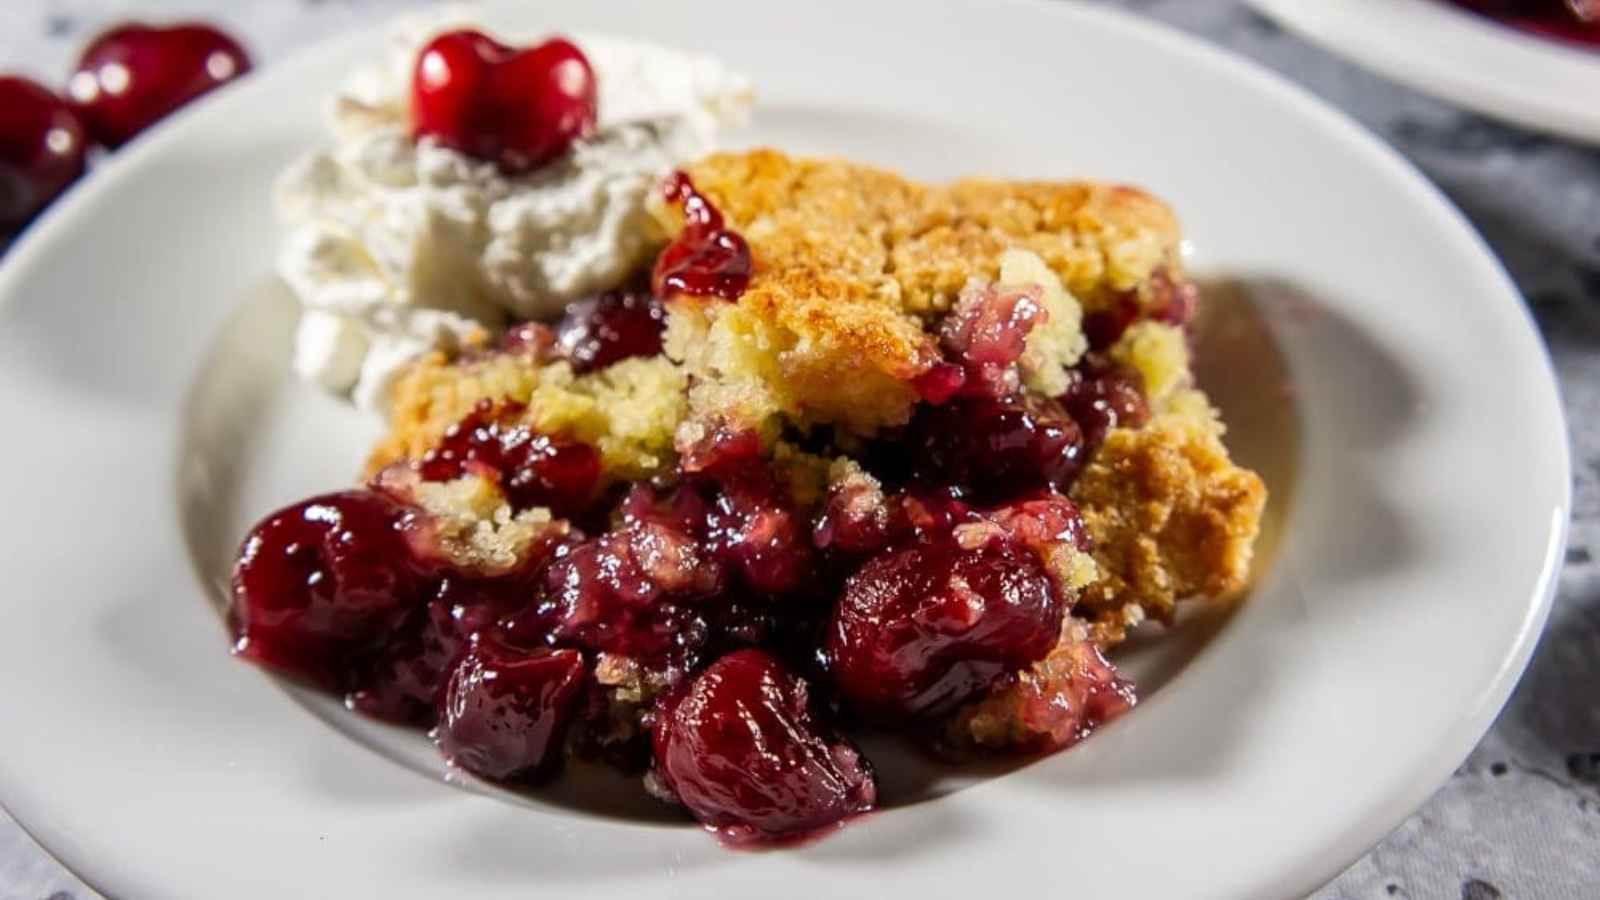 National Cherry Cobbler Day 2023: Date, History, Facts about Cherry Cobbler